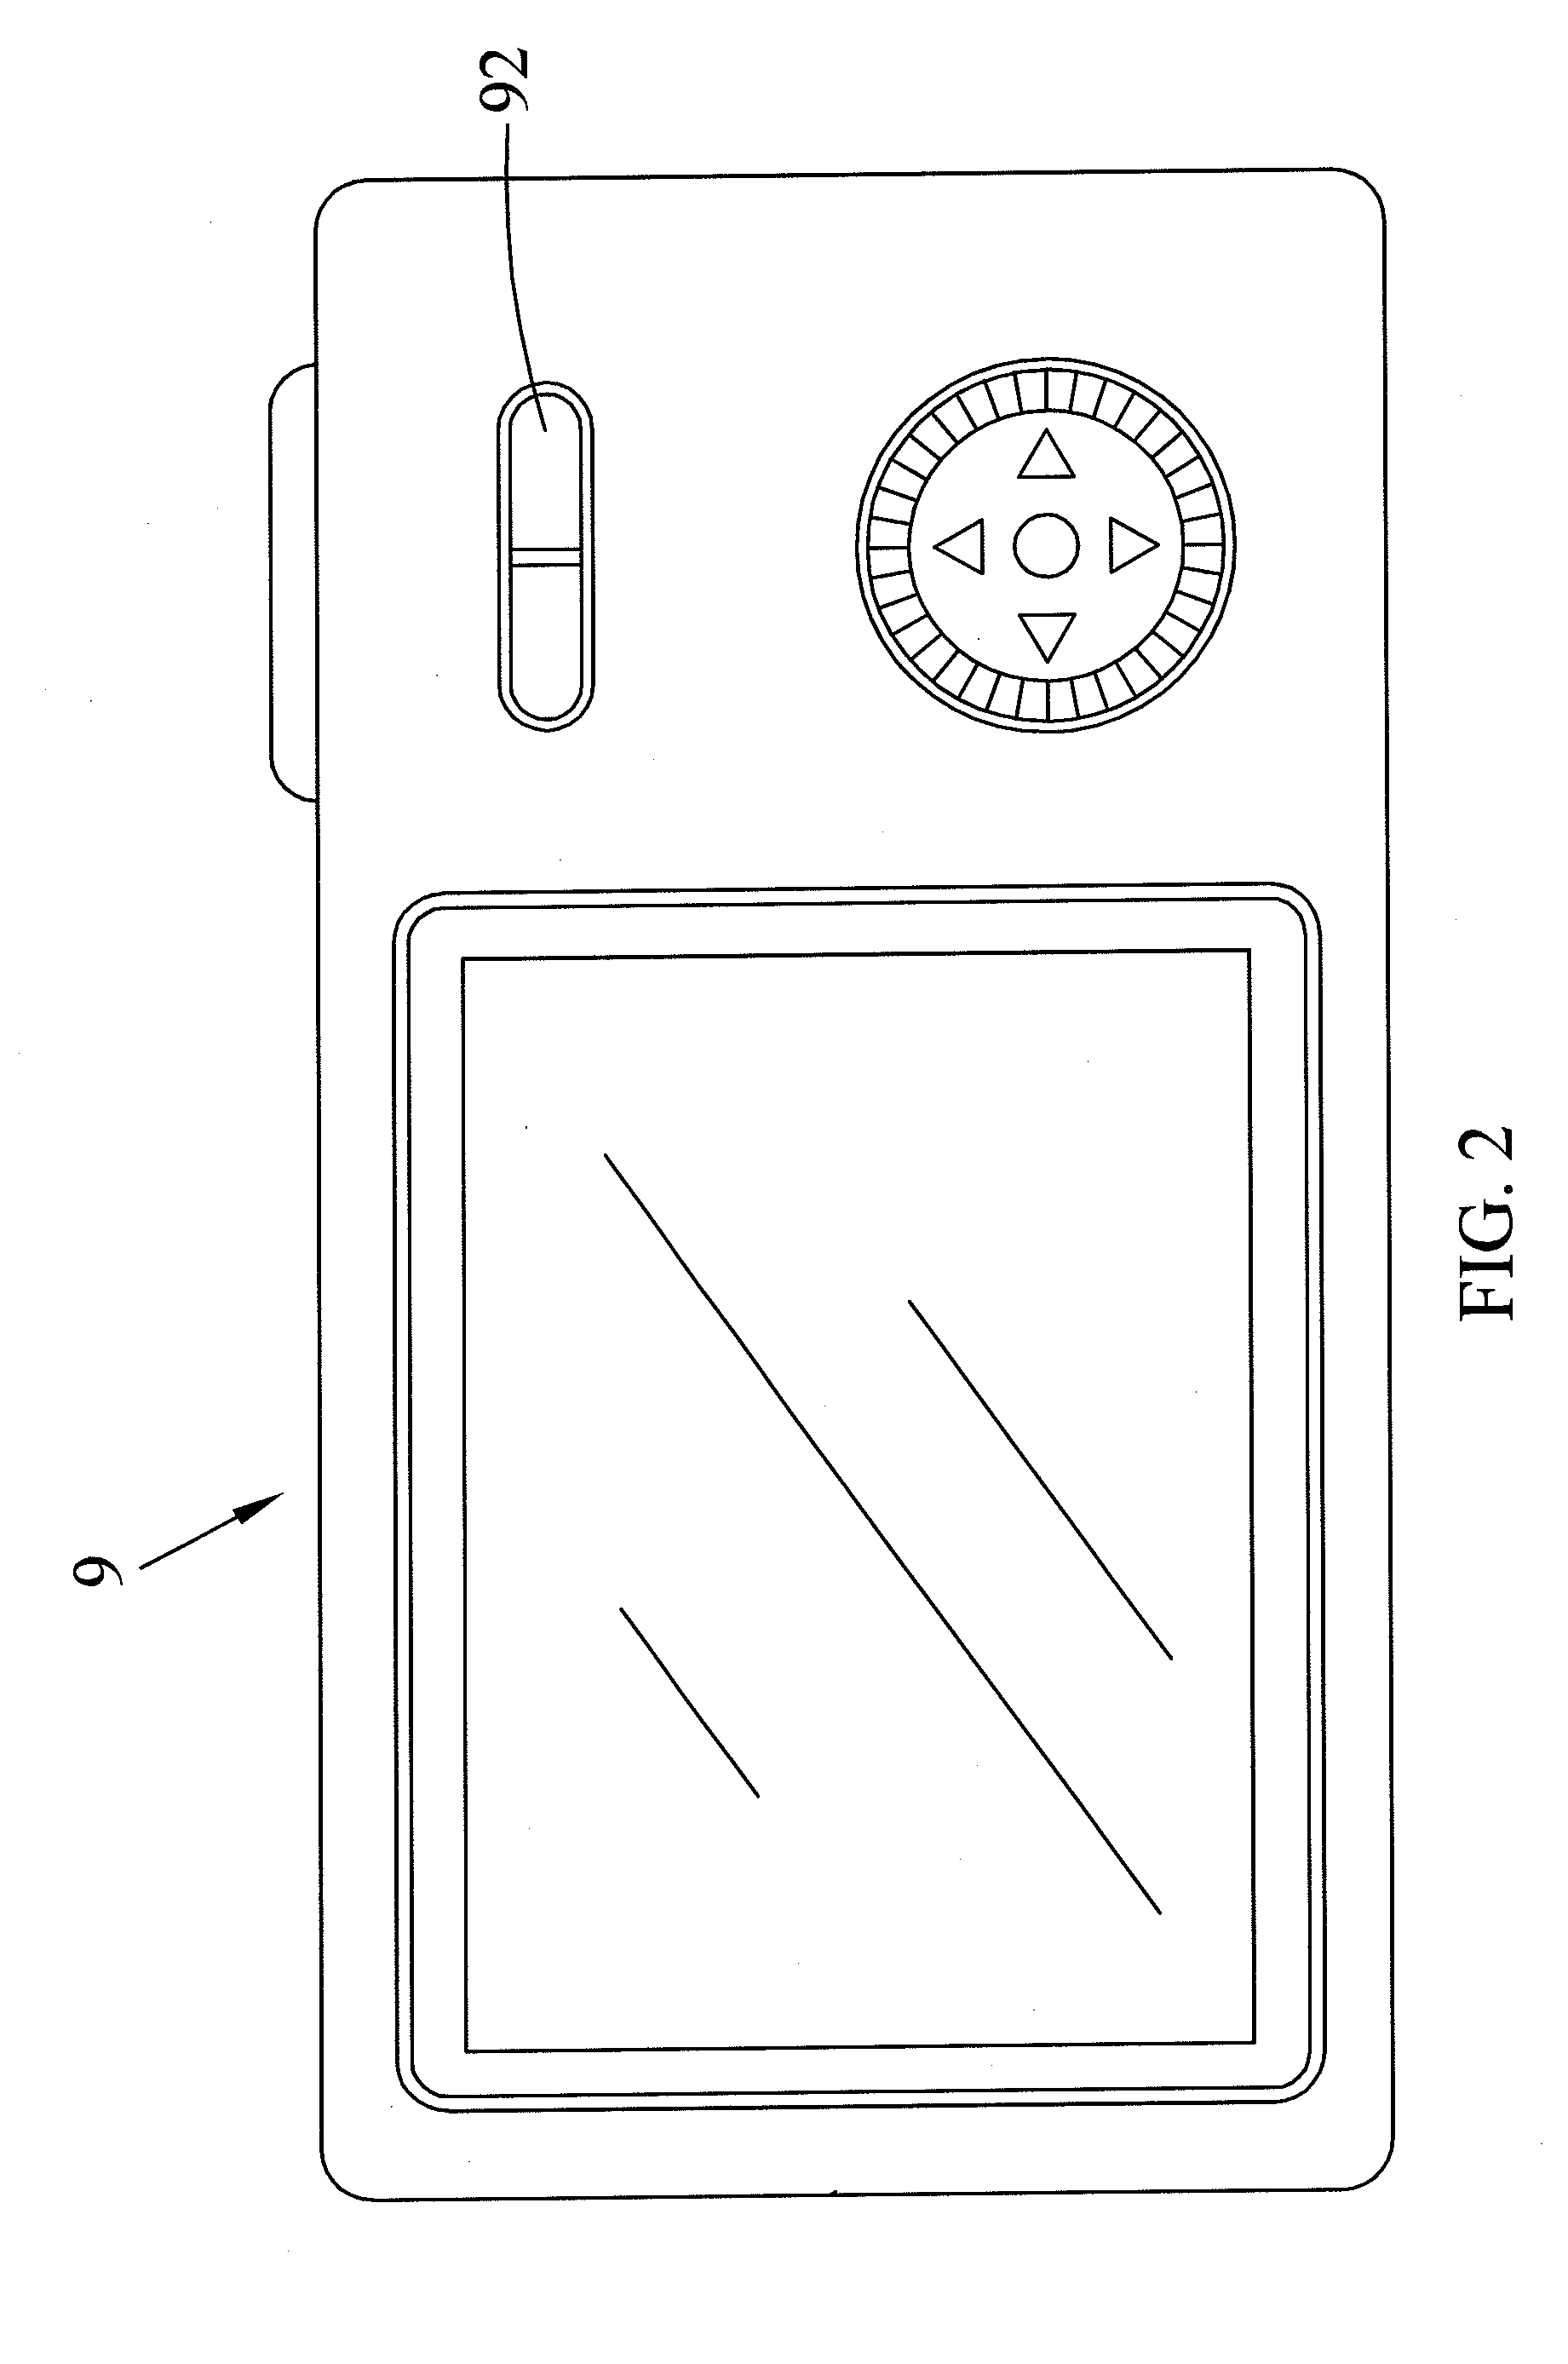 Optical lens assembly for capturing images and image capture device therewith